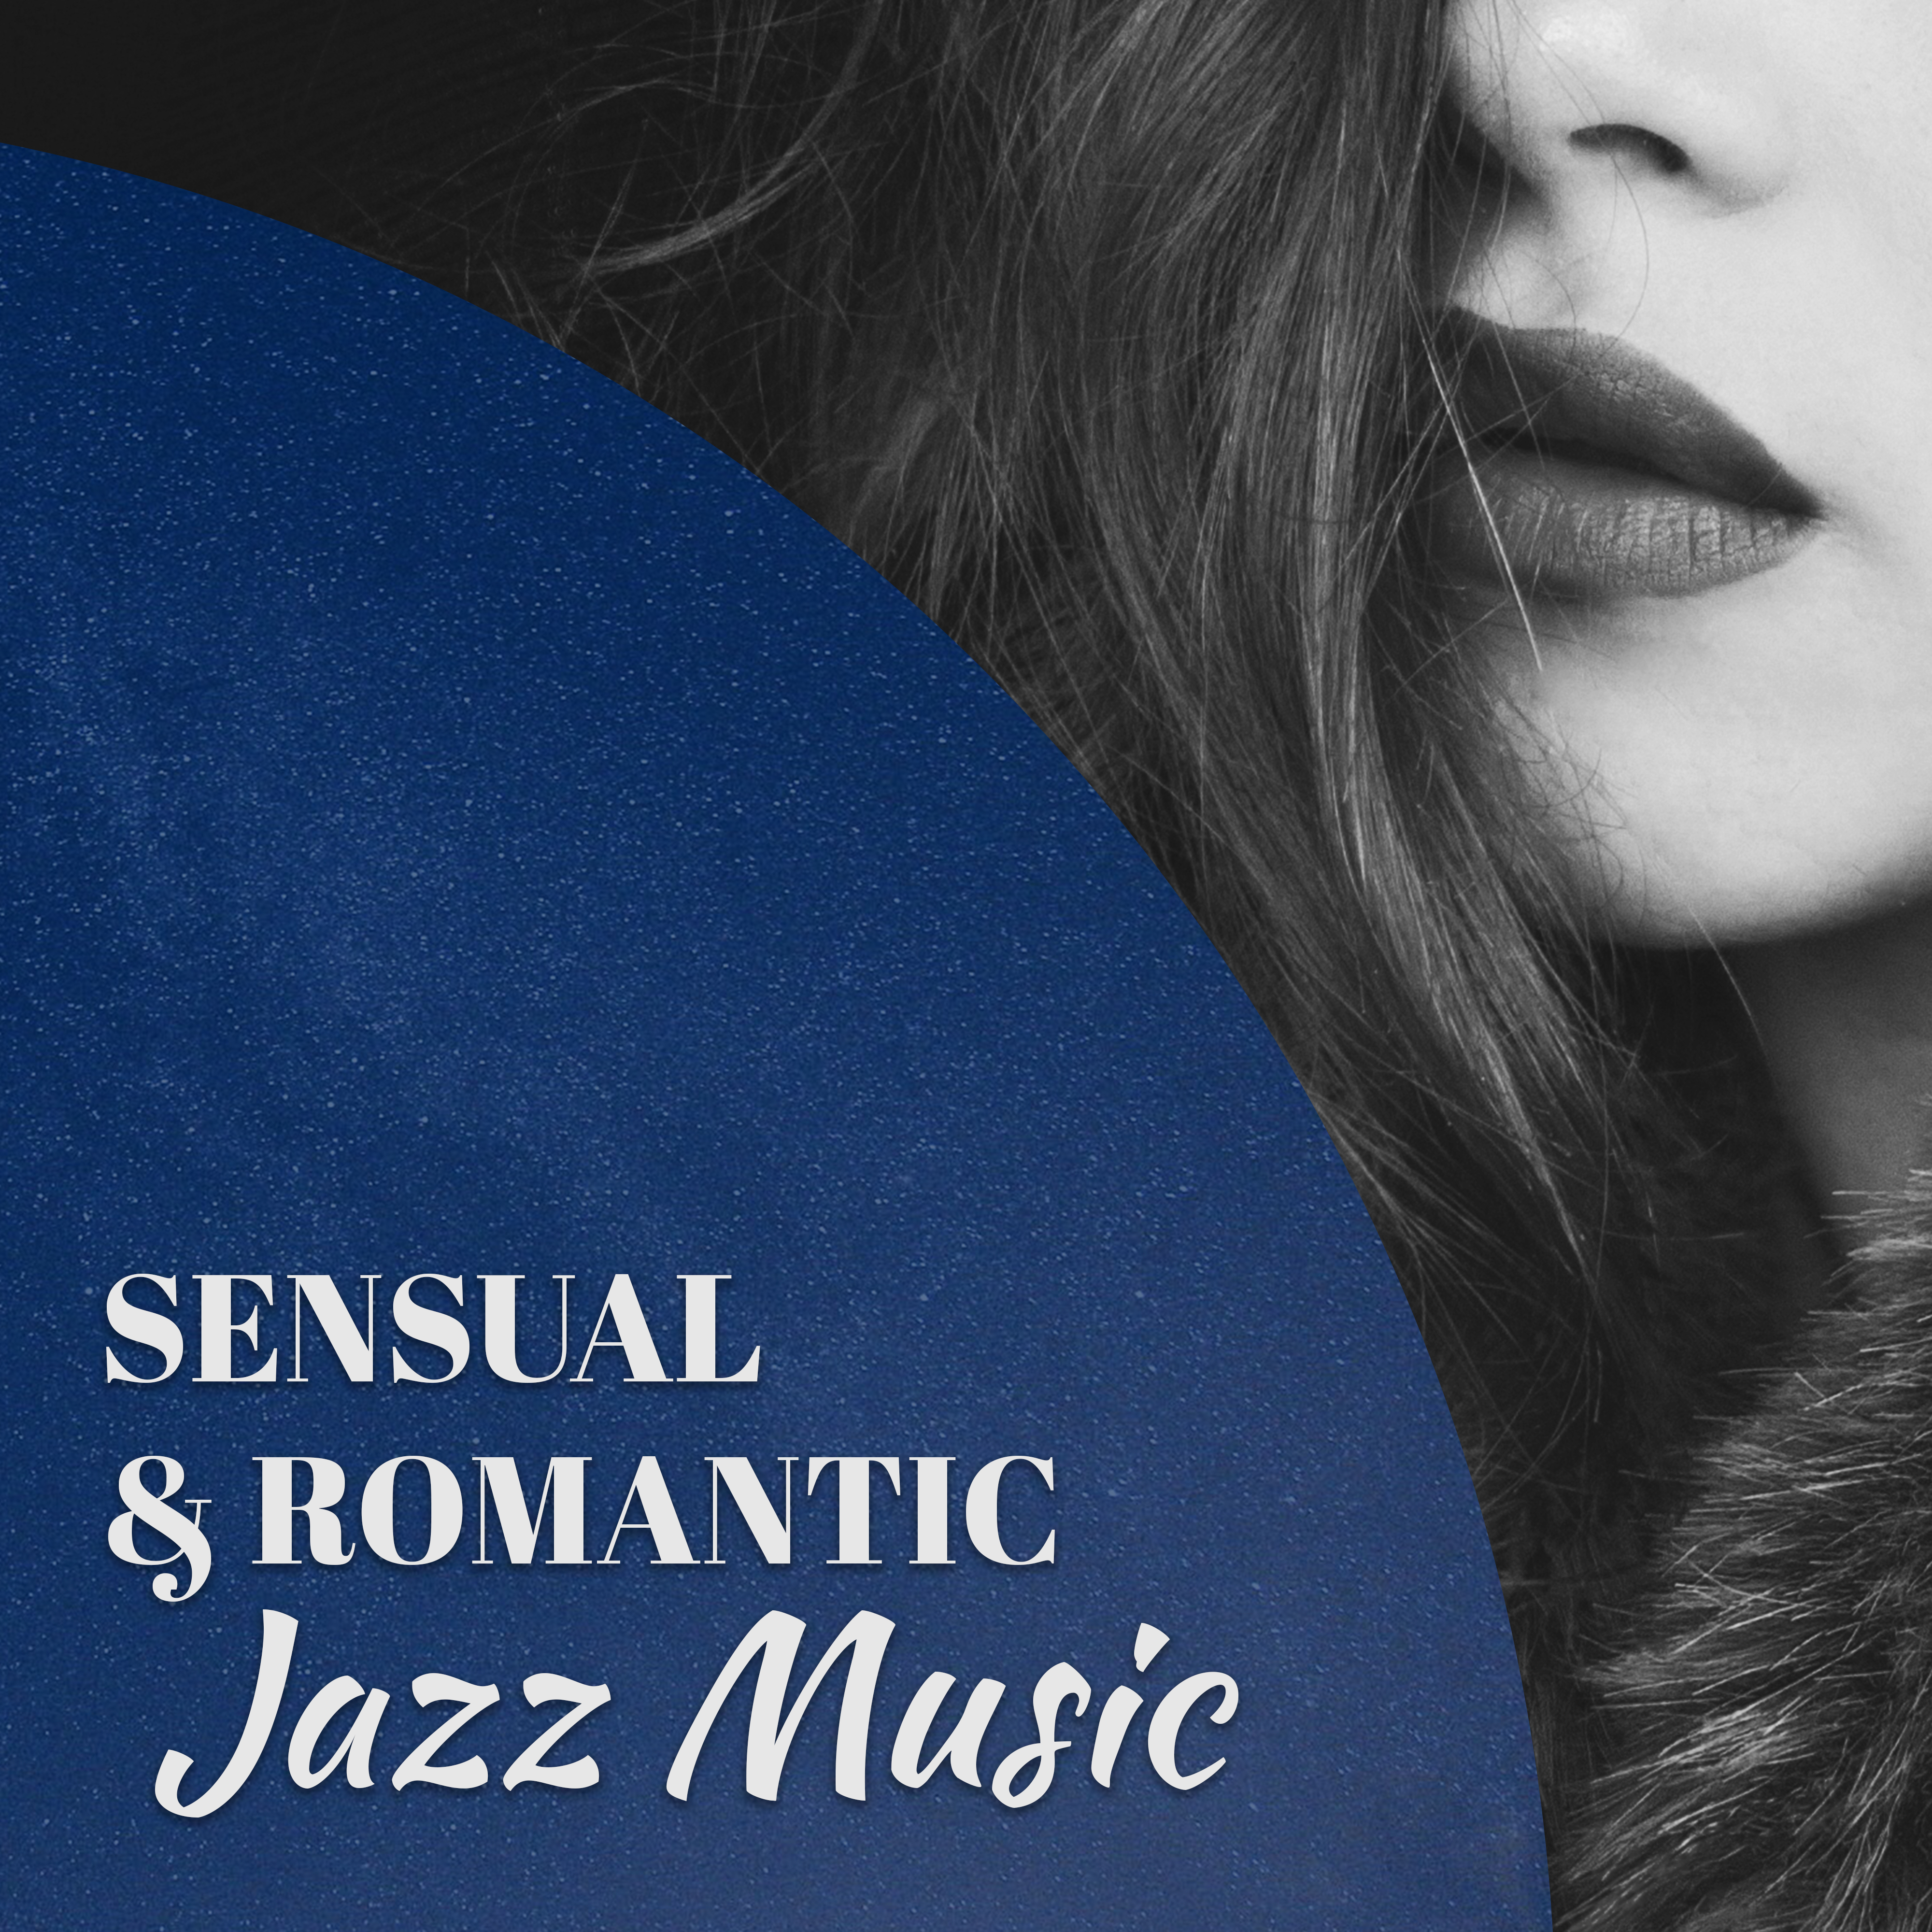 Sensual & Romantic Jazz Music – Soft Sounds to Relax, Music to Calm Down, Erotic Moments, Stress Relief